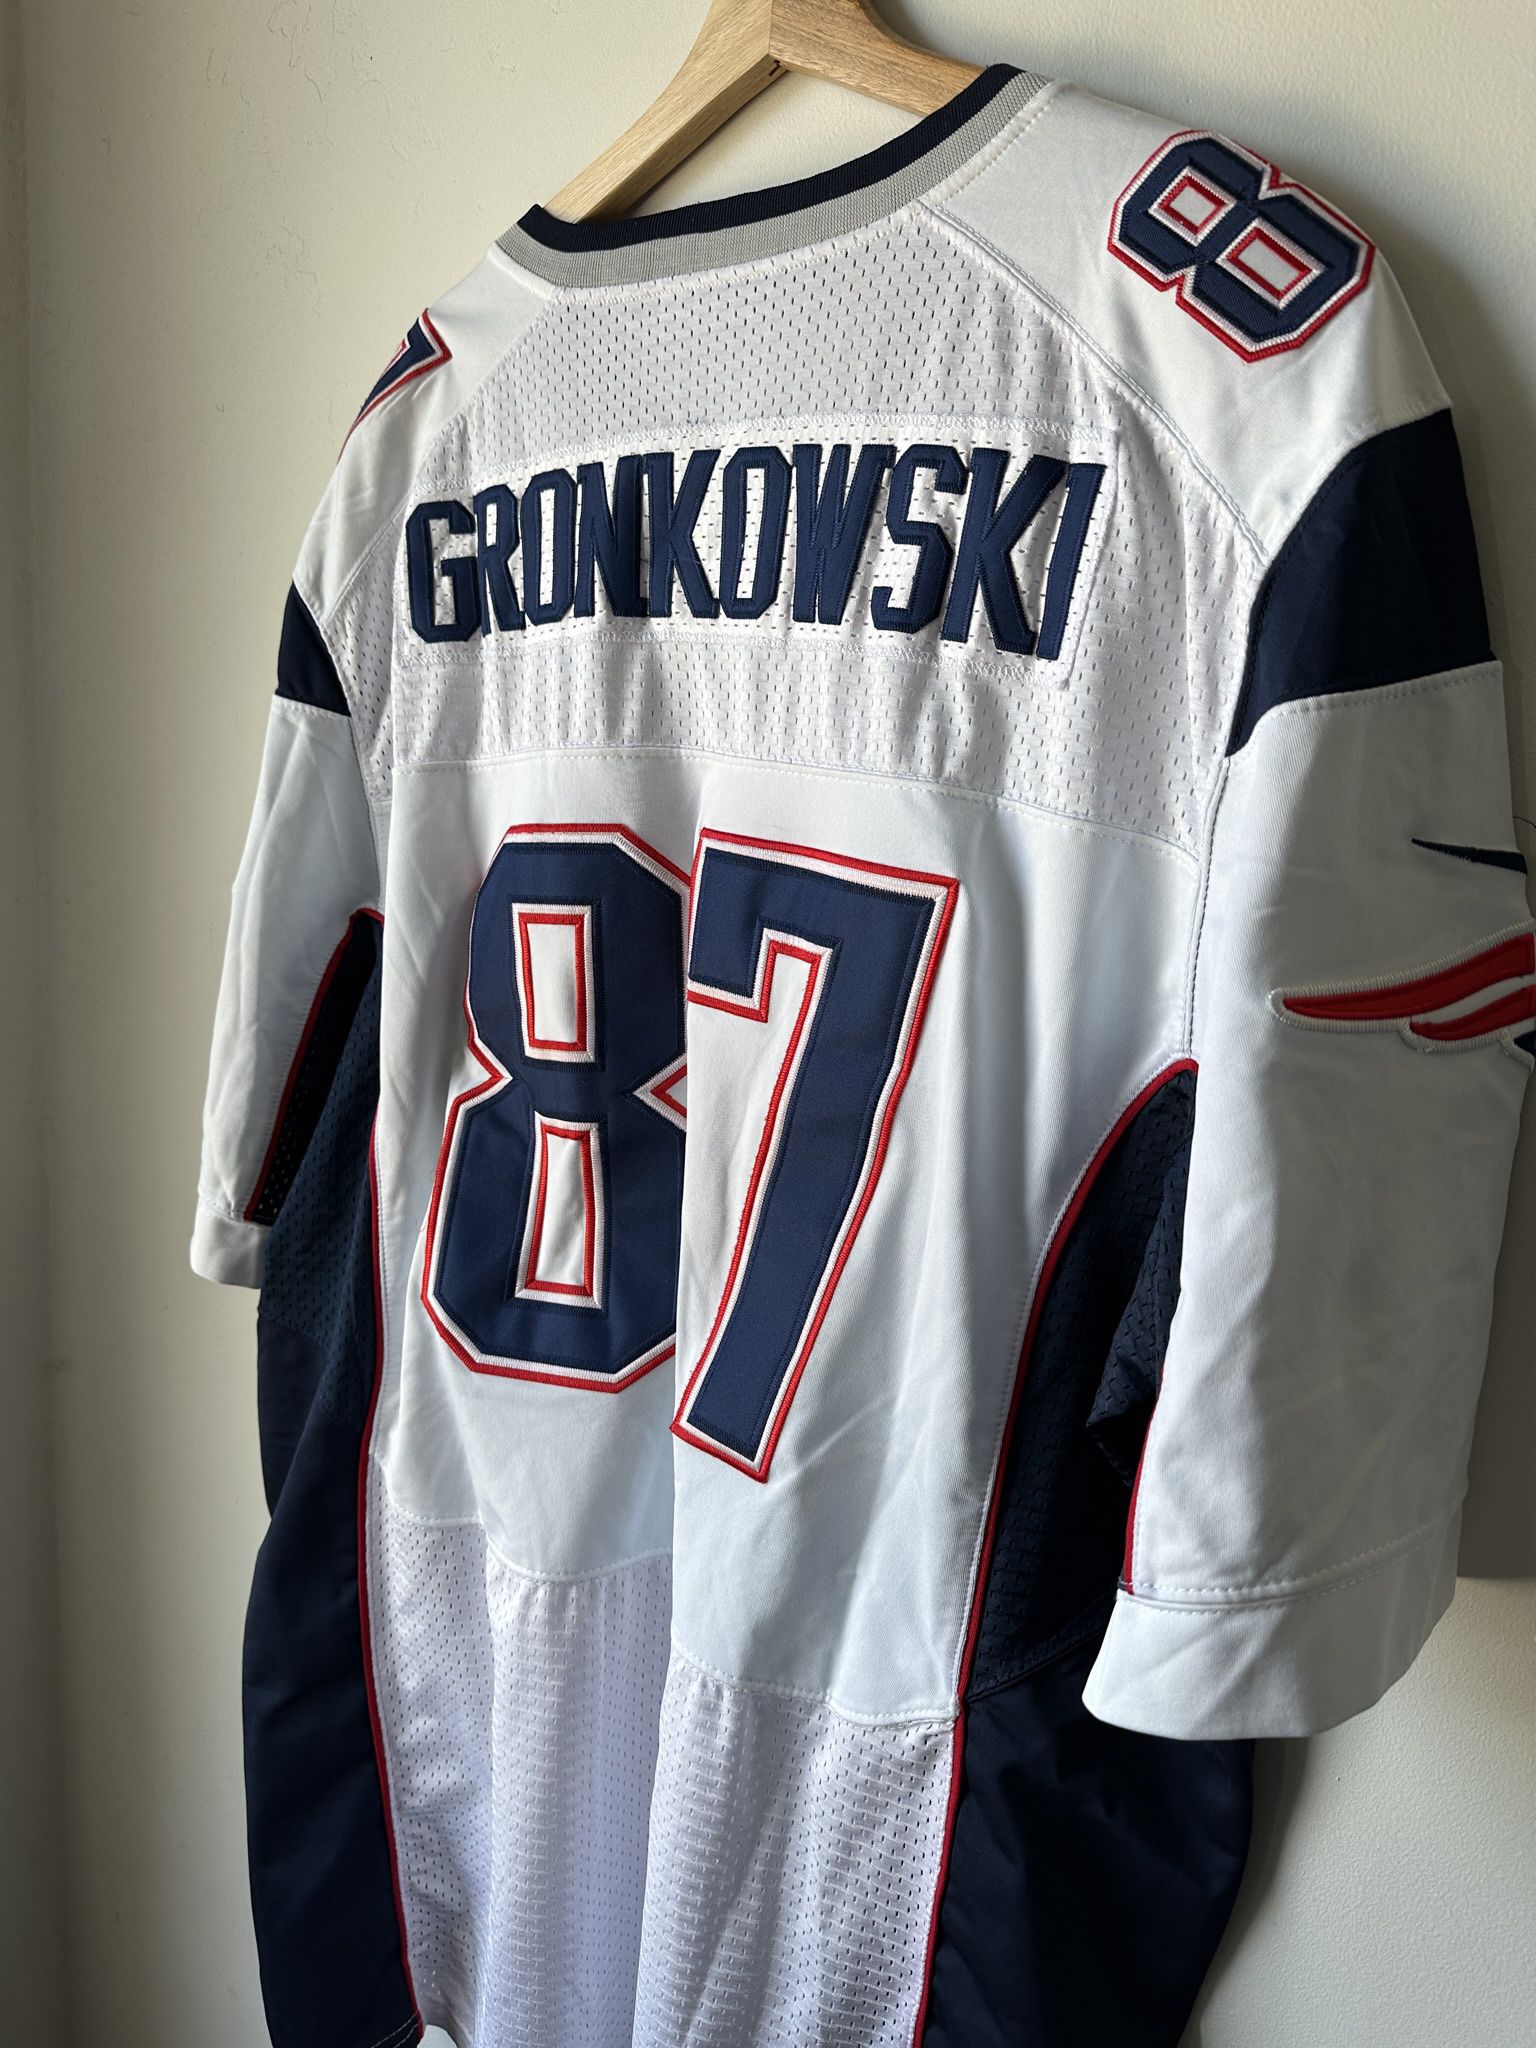 New England Patriots Nike Gronk Jersey